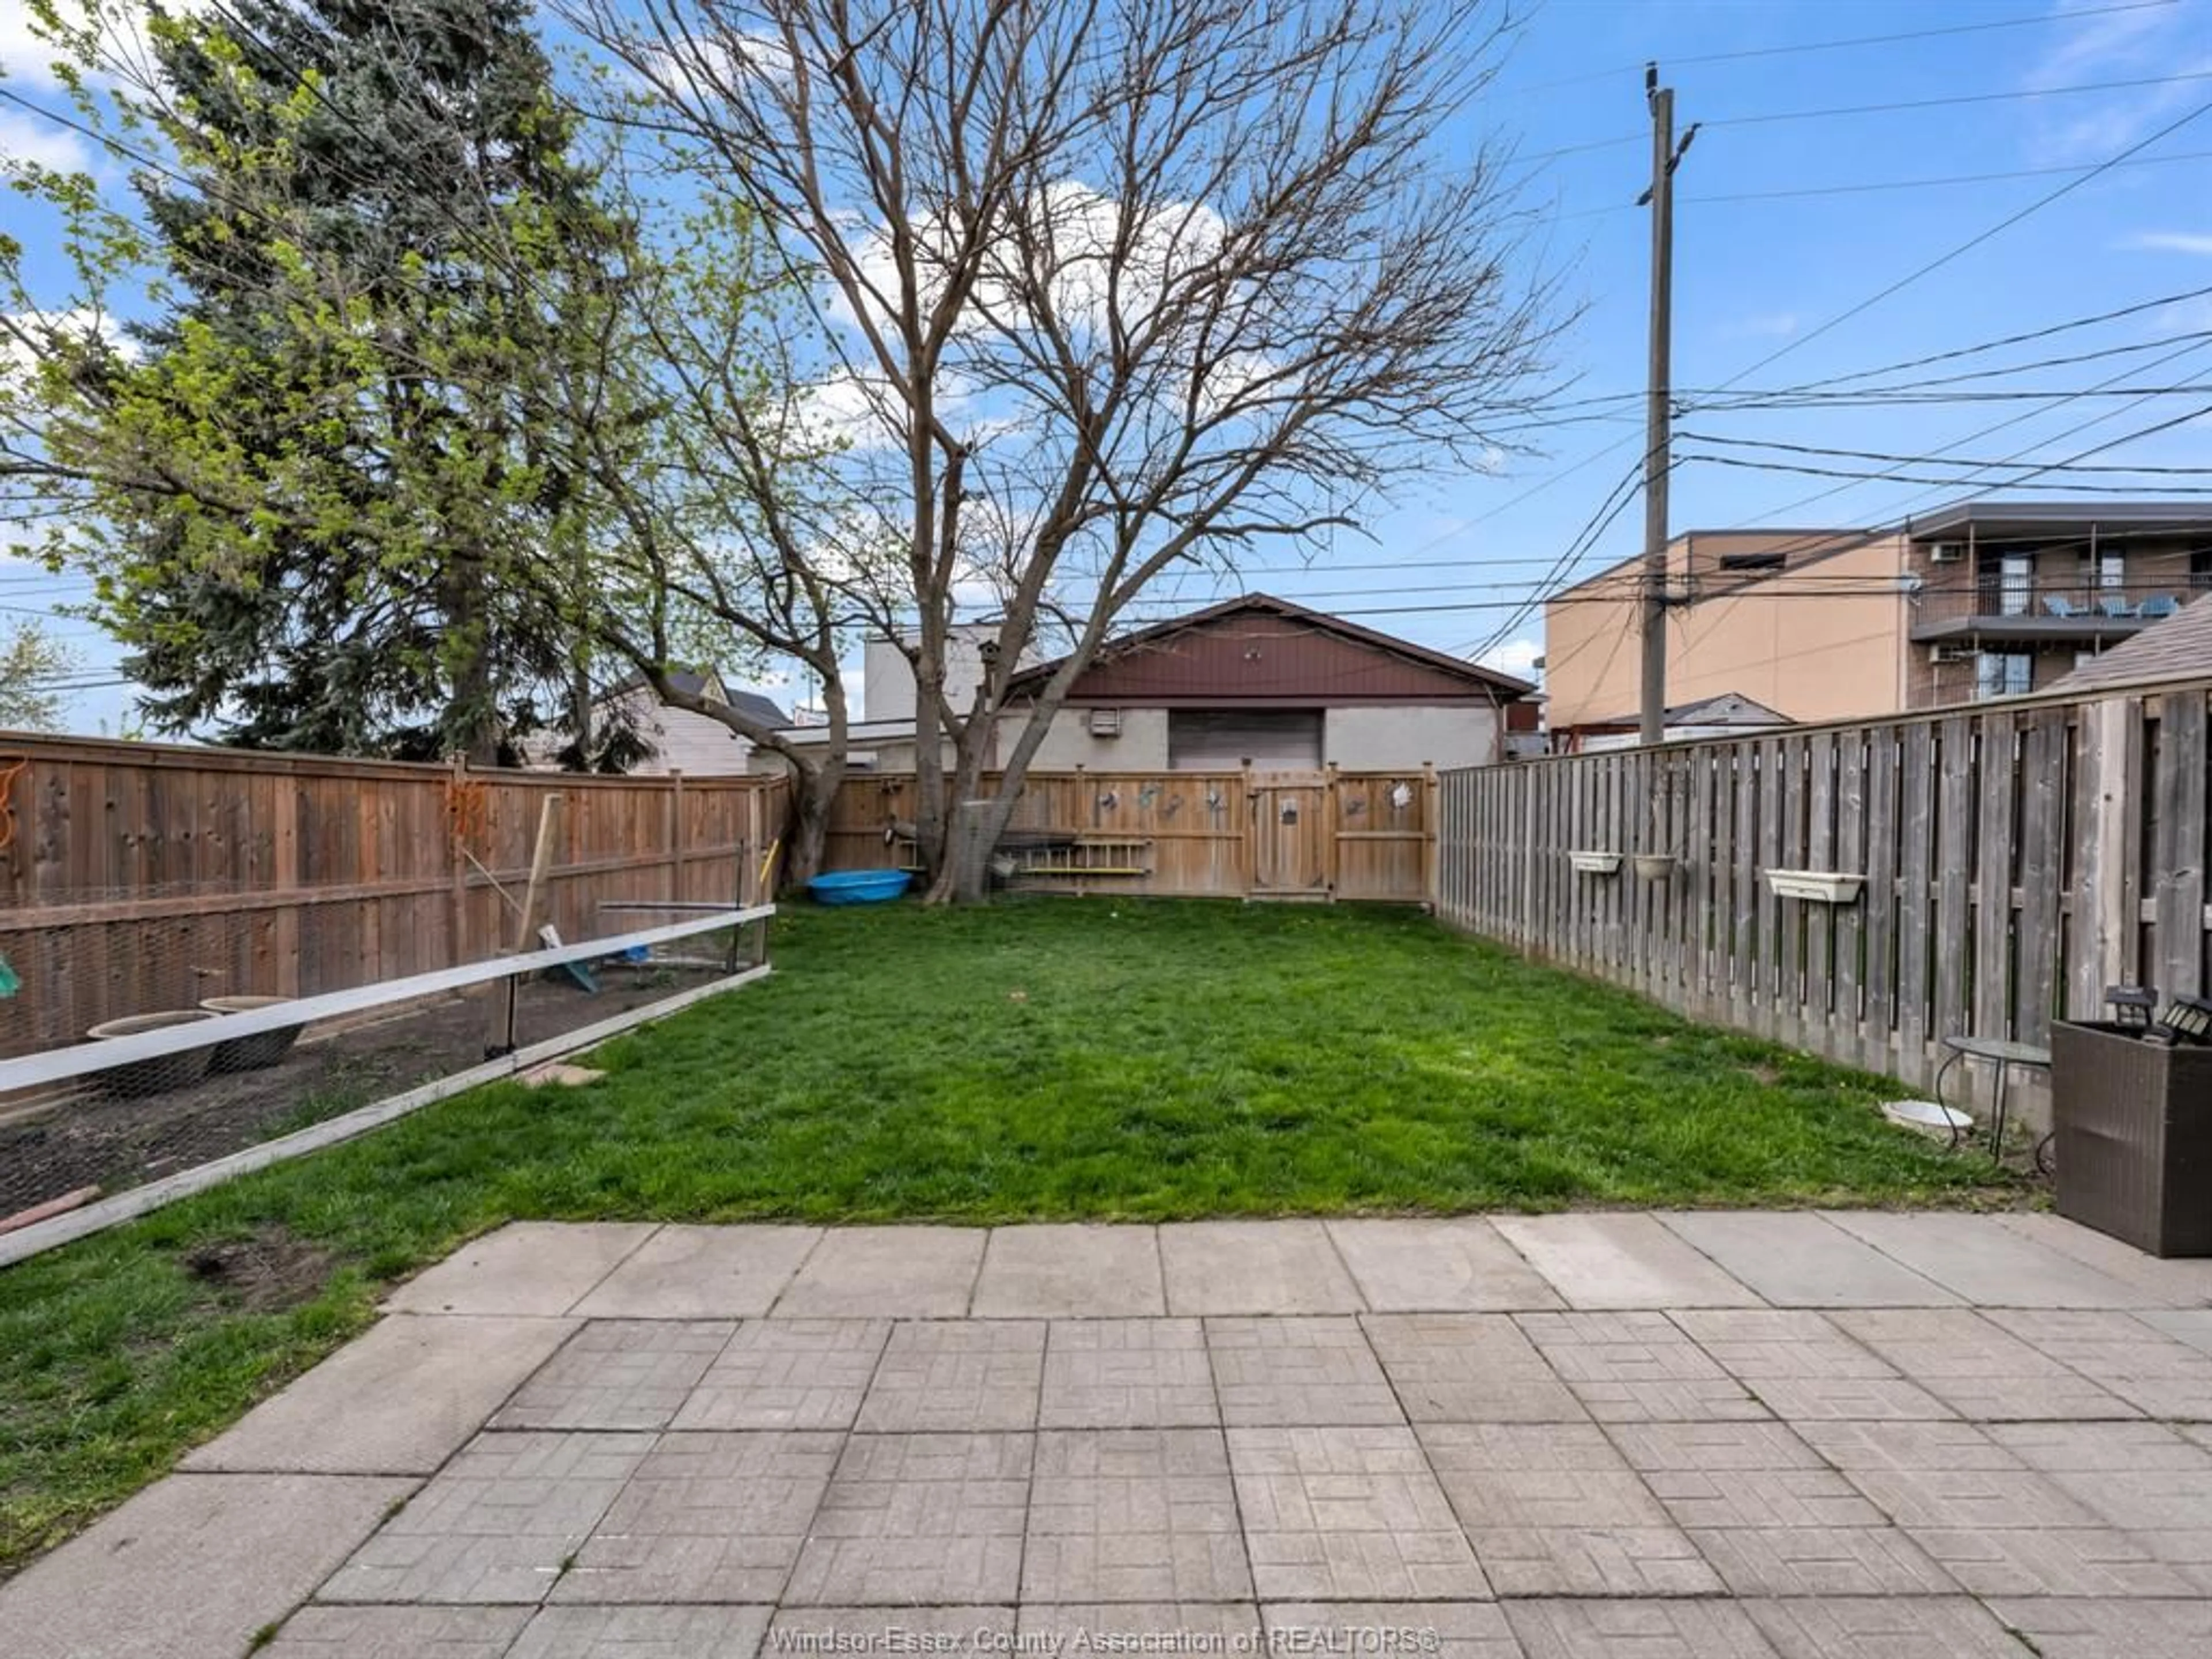 Fenced yard for 682-690 IRVINE Ave, Windsor Ontario N8X 2T2